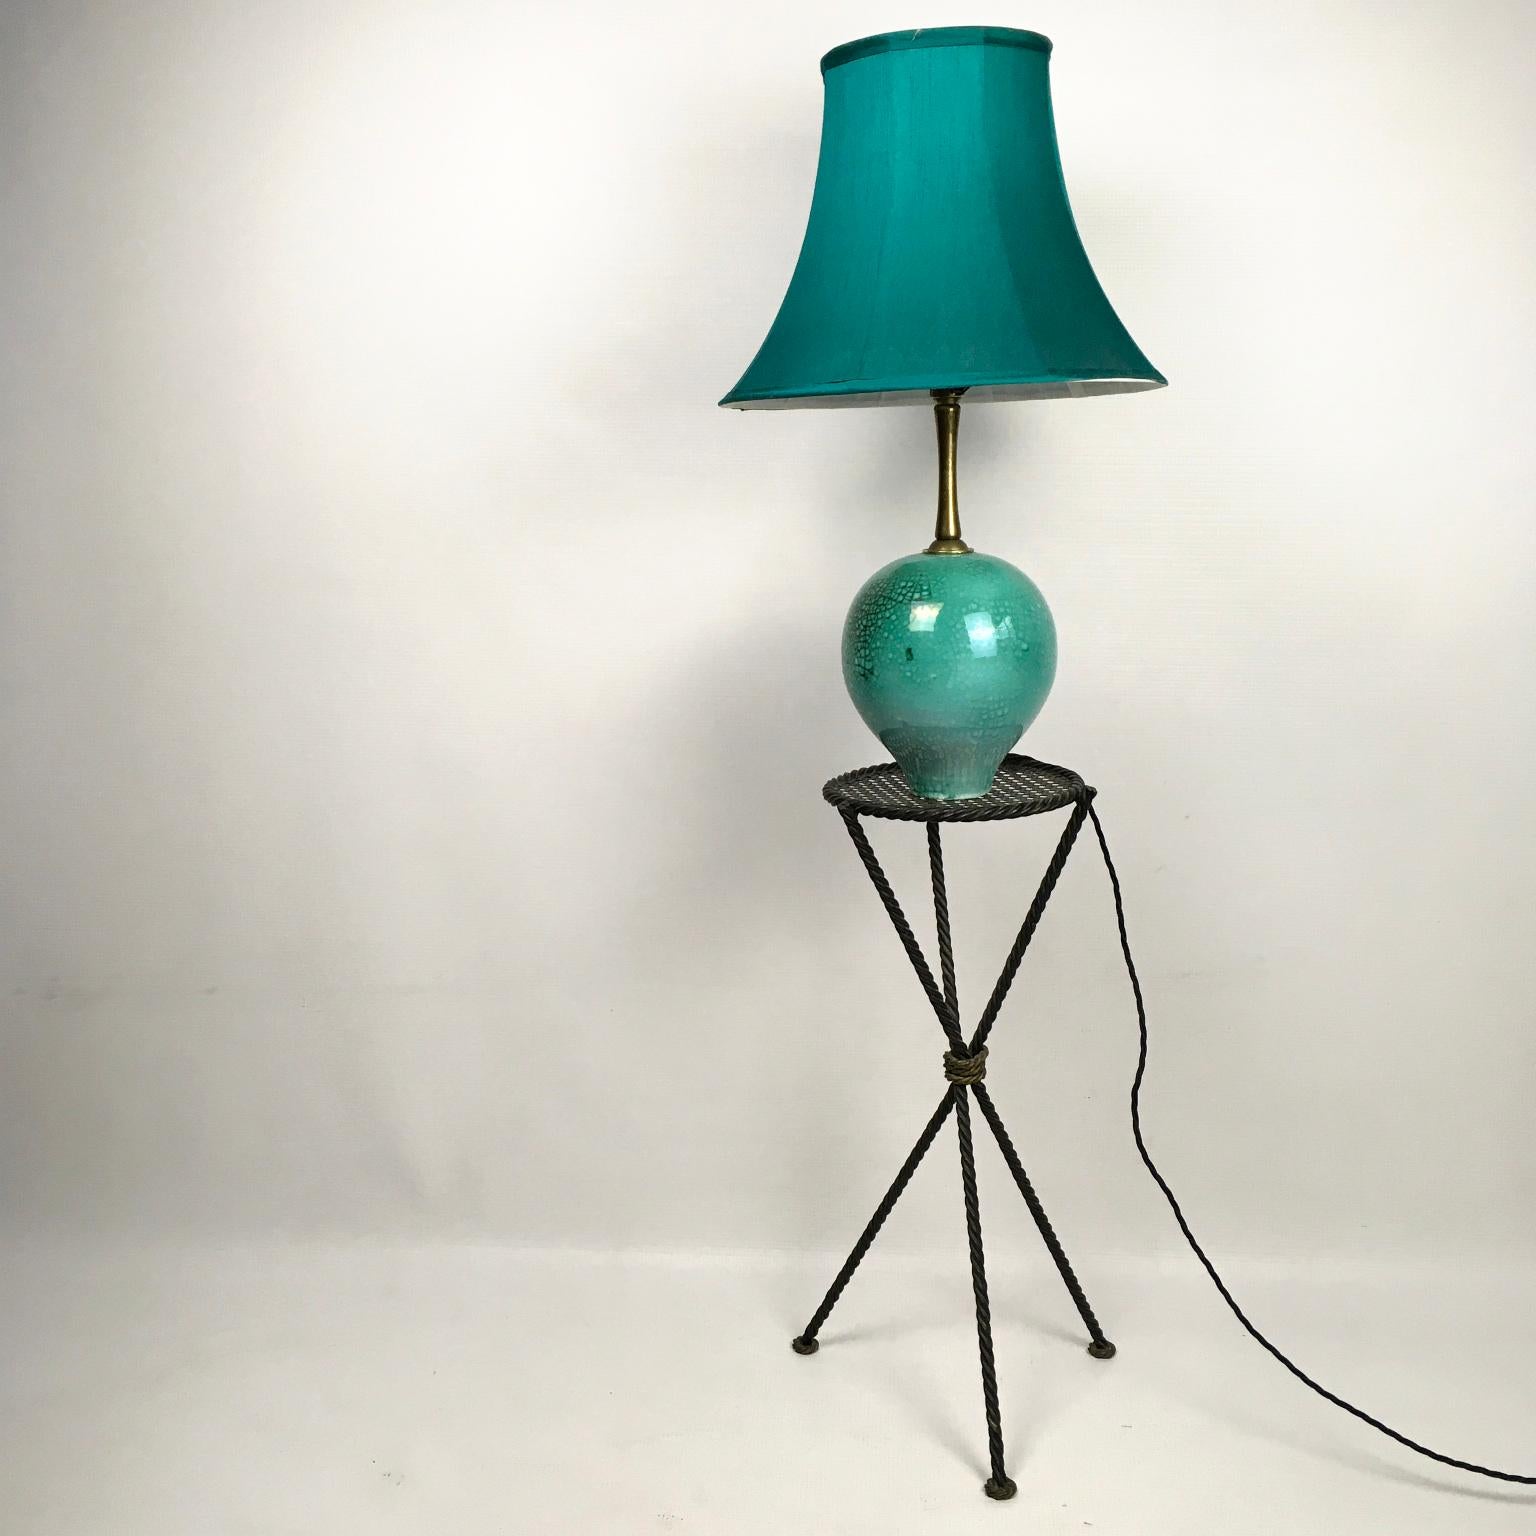 1930s Primavera Green Glazed and Cracked Ceramic Table Lamp For Sale 4